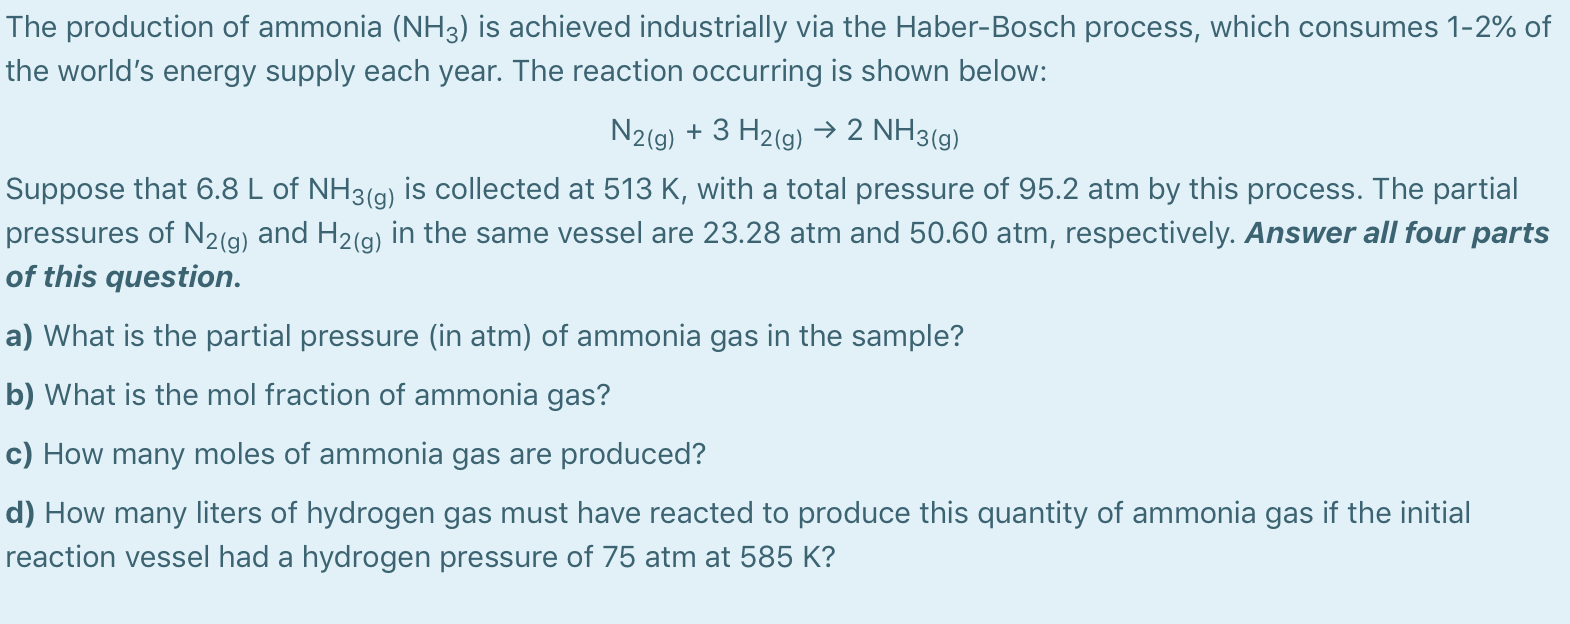 The production of ammonia (NH3) is achieved industrially via the Haber-Bosch process, which consumes 1-2% of
the world's energy supply each year. The reaction occurring is shown below:
N2(g) + 3 H2(g) → 2 NH3(g)
Suppose that 6.8 L of NH3(g) is collected at 513 K, with a total pressure of 95.2 atm by this process. The partial
pressures of N2(g) and H2(g) in the same vessel are 23.28 atm and 50.60 atm, respectively. Answer all four parts
of this question.
a) What is the partial pressure (in atm) of ammonia gas in the sample?
b) What is the mol fraction of ammonia gas?
c) How many moles of ammonia gas are produced?
d) How many liters of hydrogen gas must have reacted to produce this quantity of ammonia gas if the initial
reaction vessel had a hydrogen pressure of 75 atm at 585 K?
